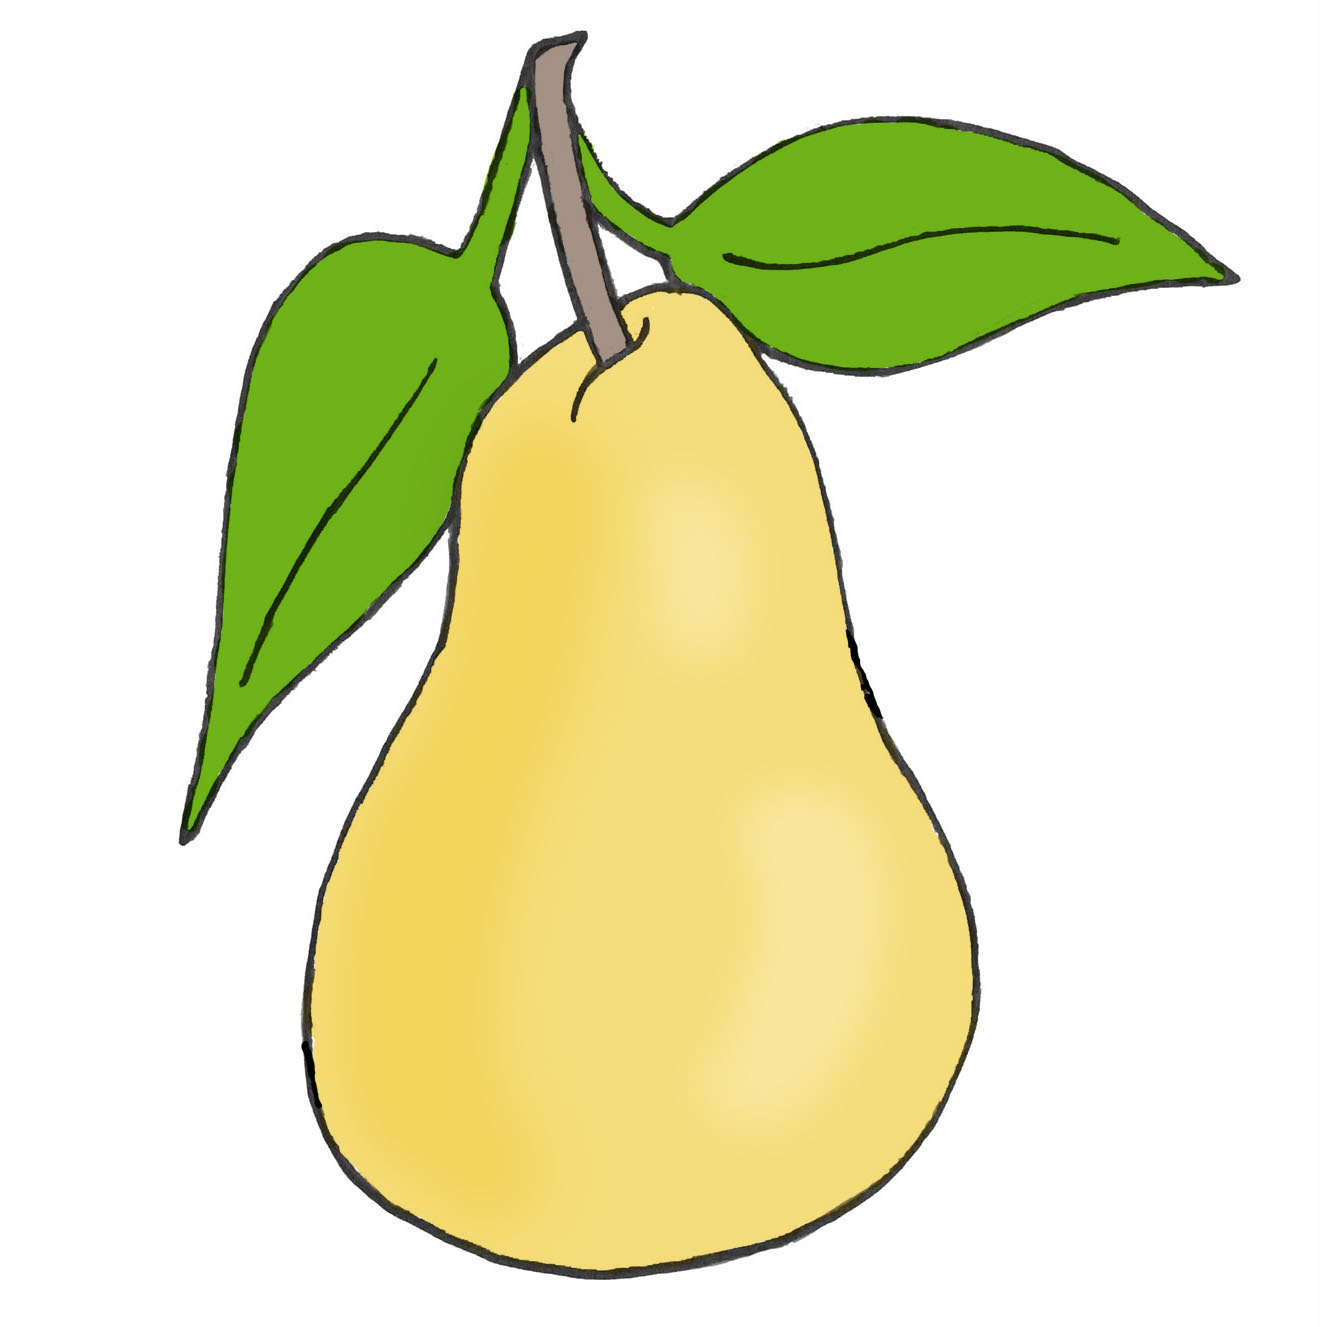 Pear Drawing Detailed Sketch